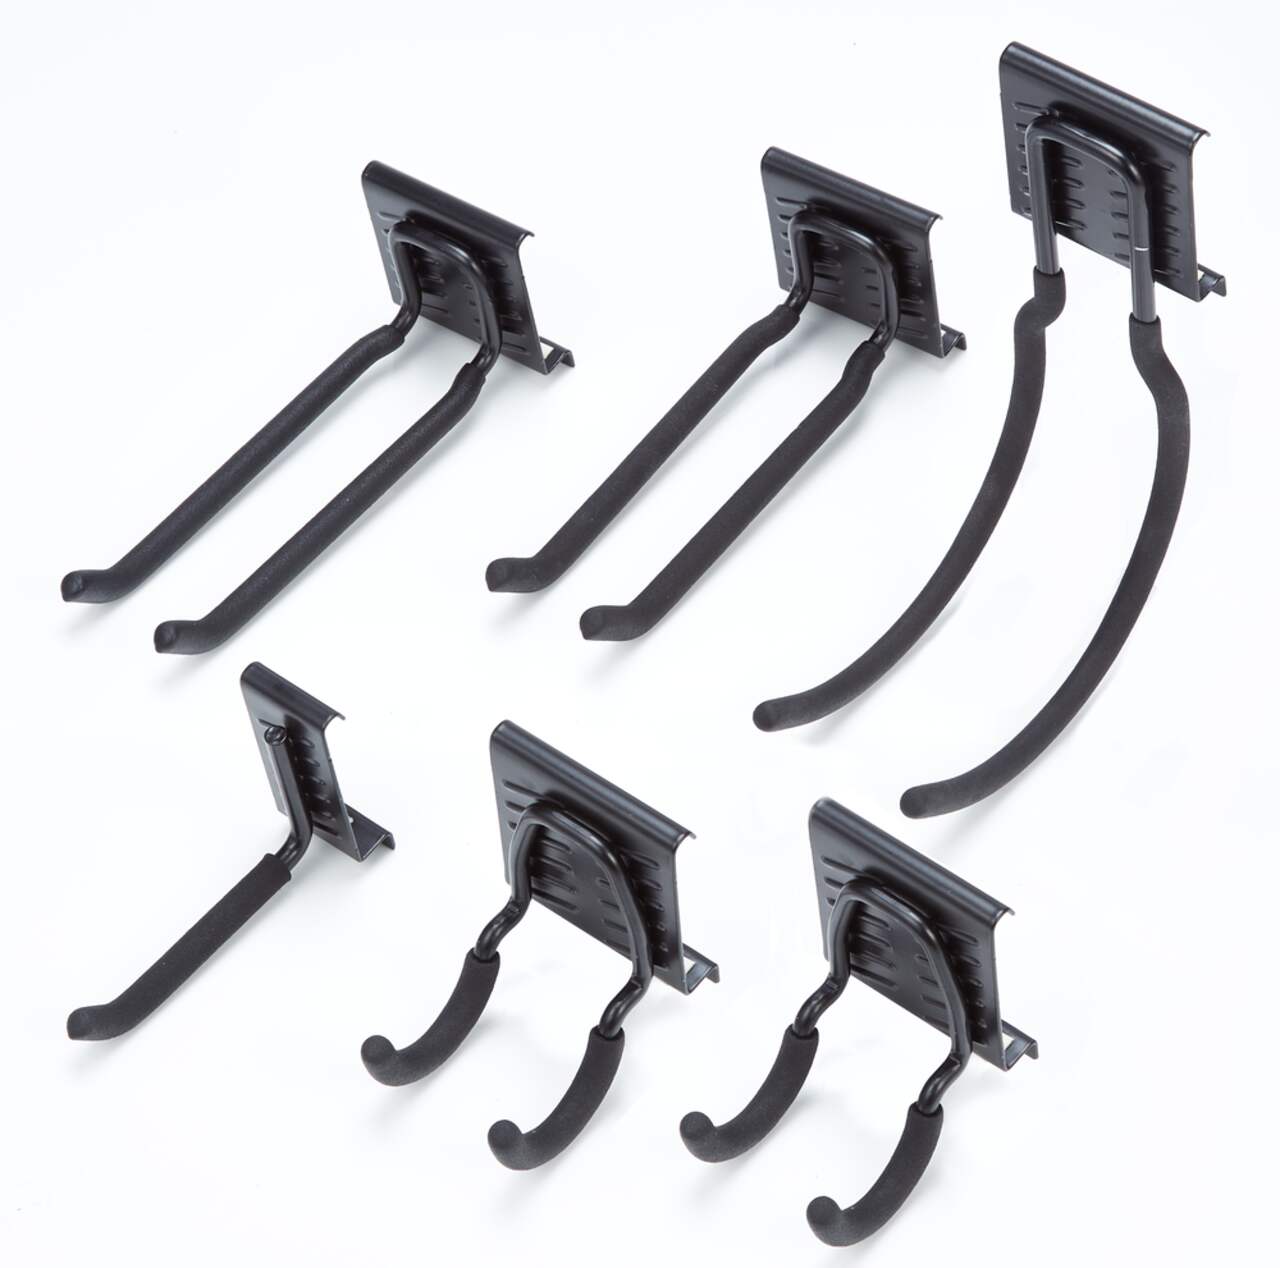 https://media-www.canadiantire.ca/product/fixing/tools/garage-organization/0681539/mastercraft-6-piece-hook-set-85adef13-3e55-4a04-a0e2-f56a86dfd3d4.png?imdensity=1&imwidth=640&impolicy=mZoom